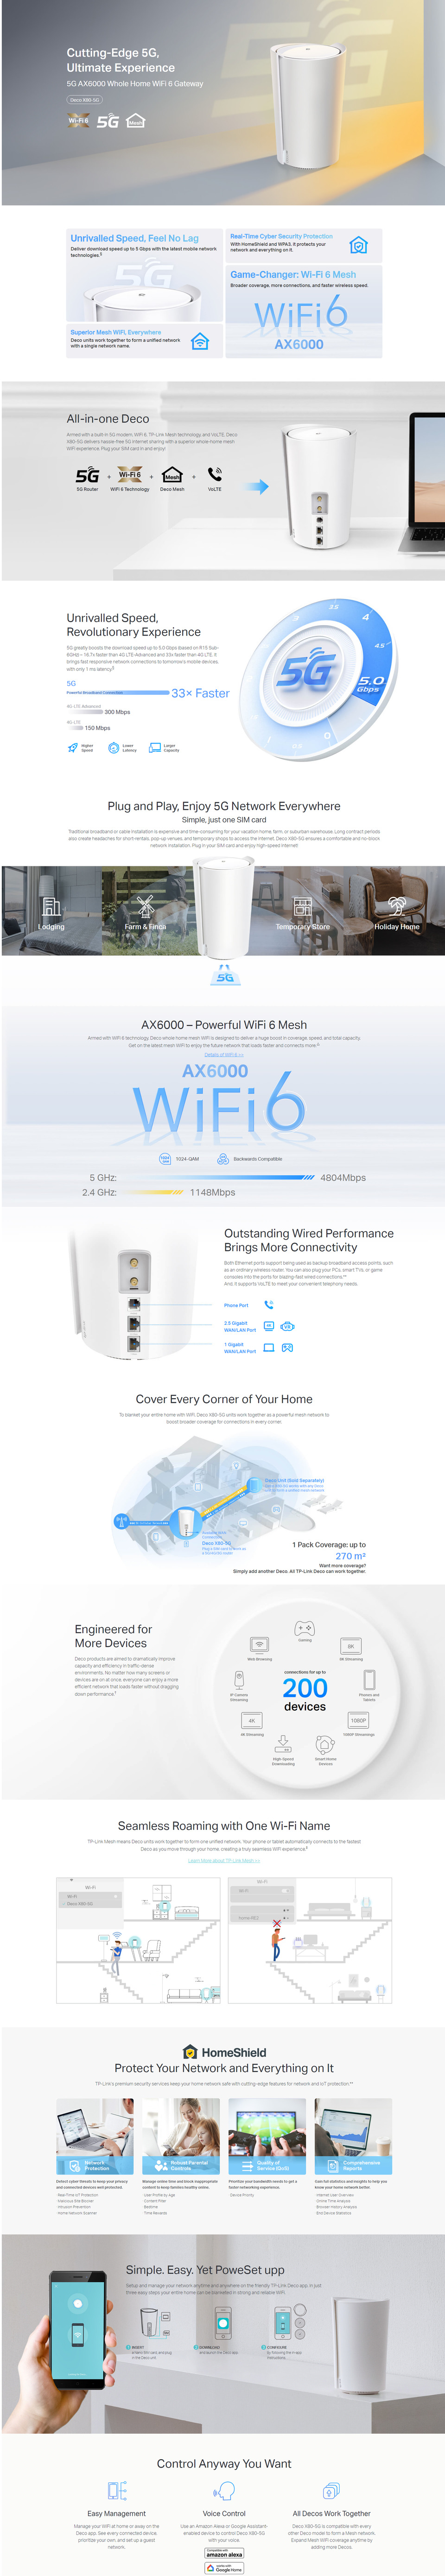 tp-link deco x80-5g 1 pack wireless-ax6000 whole home mesh system